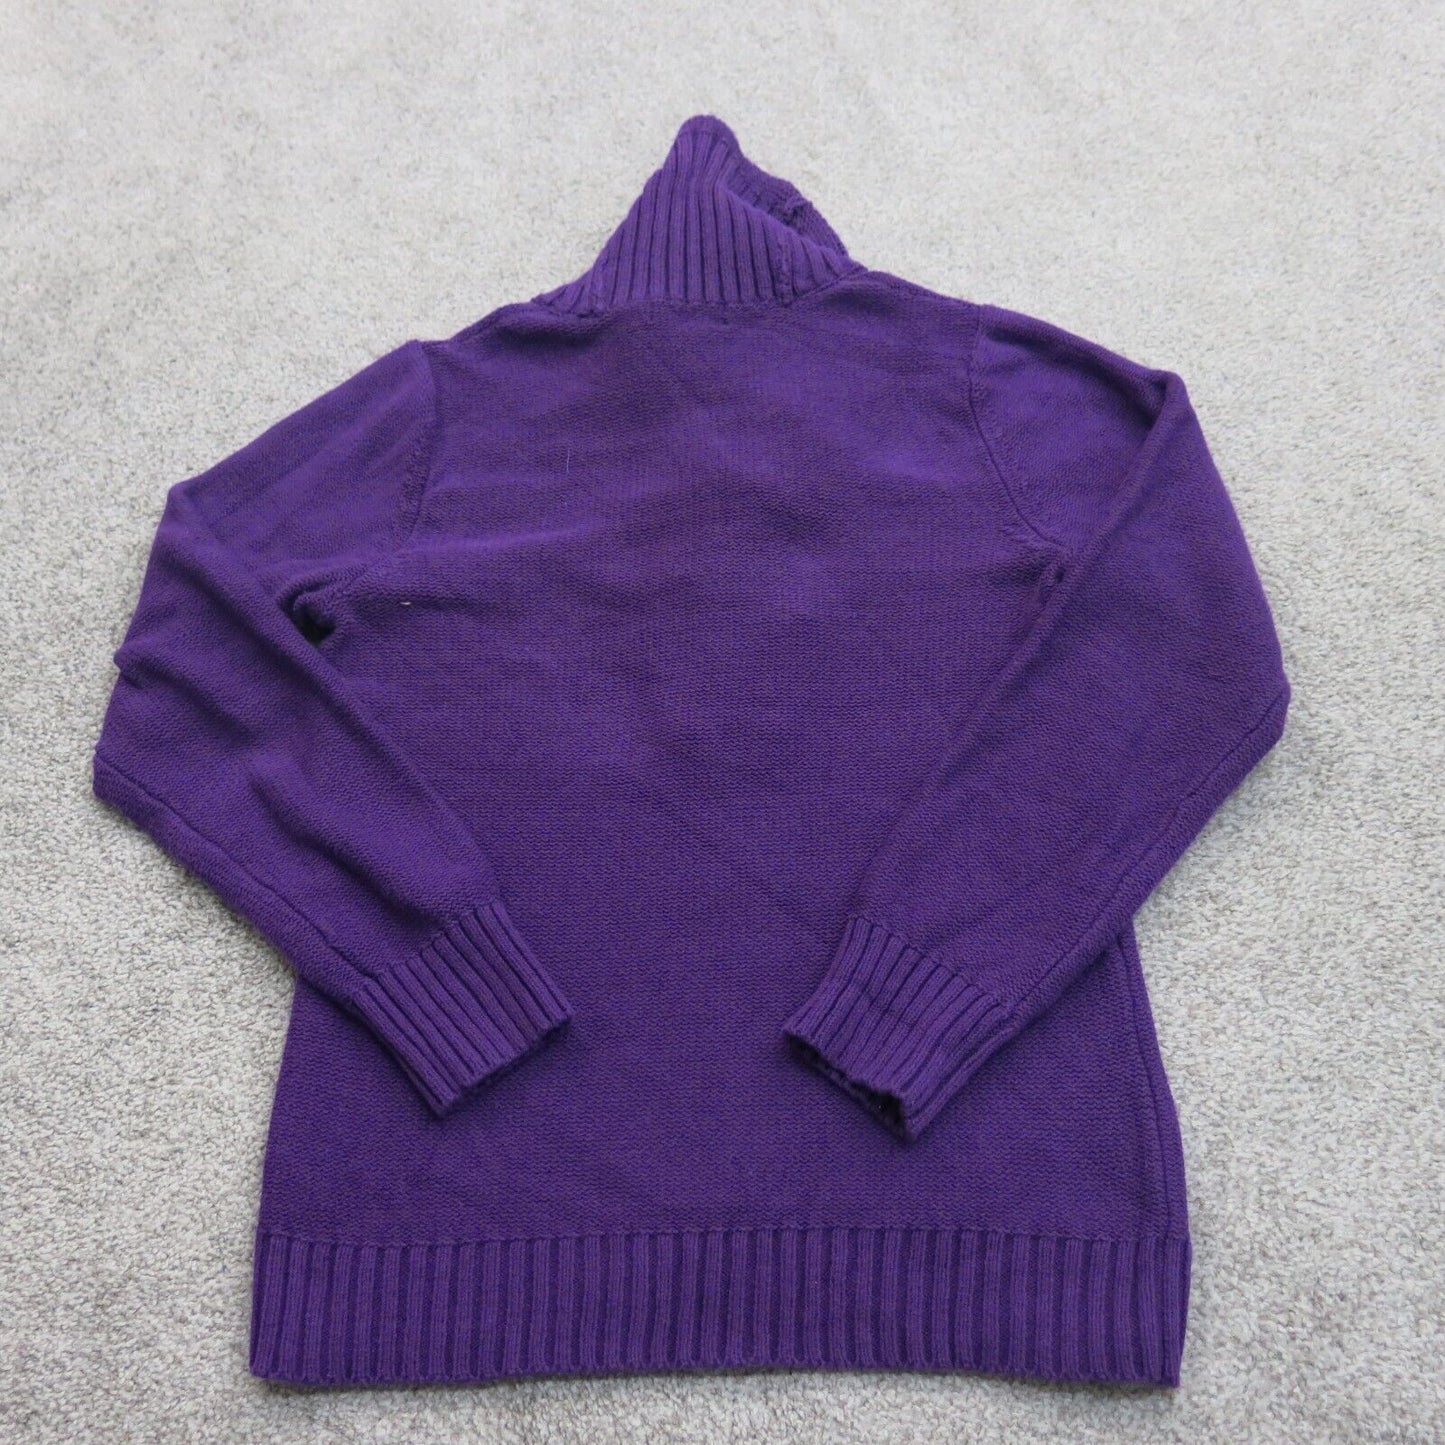 Ralph Lauren Women Pullover Sweater Long Sleeves Front Button Purple Size Large